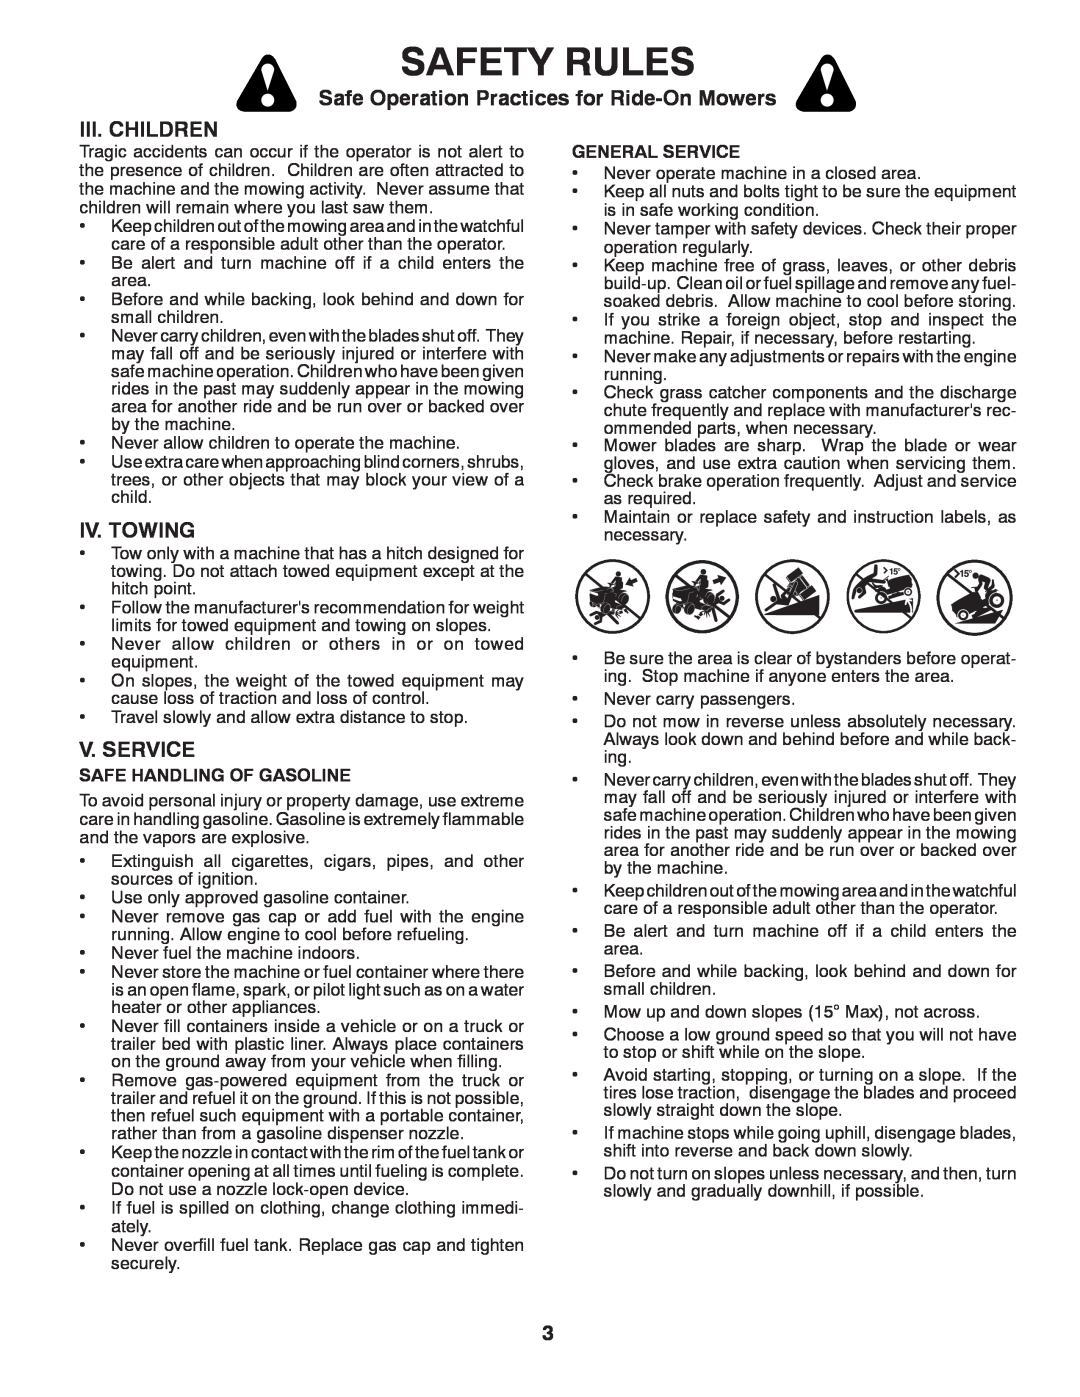 Dixon D26BH54, 434722 Iii. Children, Iv. Towing, V. Service, Safety Rules, Safe Operation Practices for Ride-On Mowers 